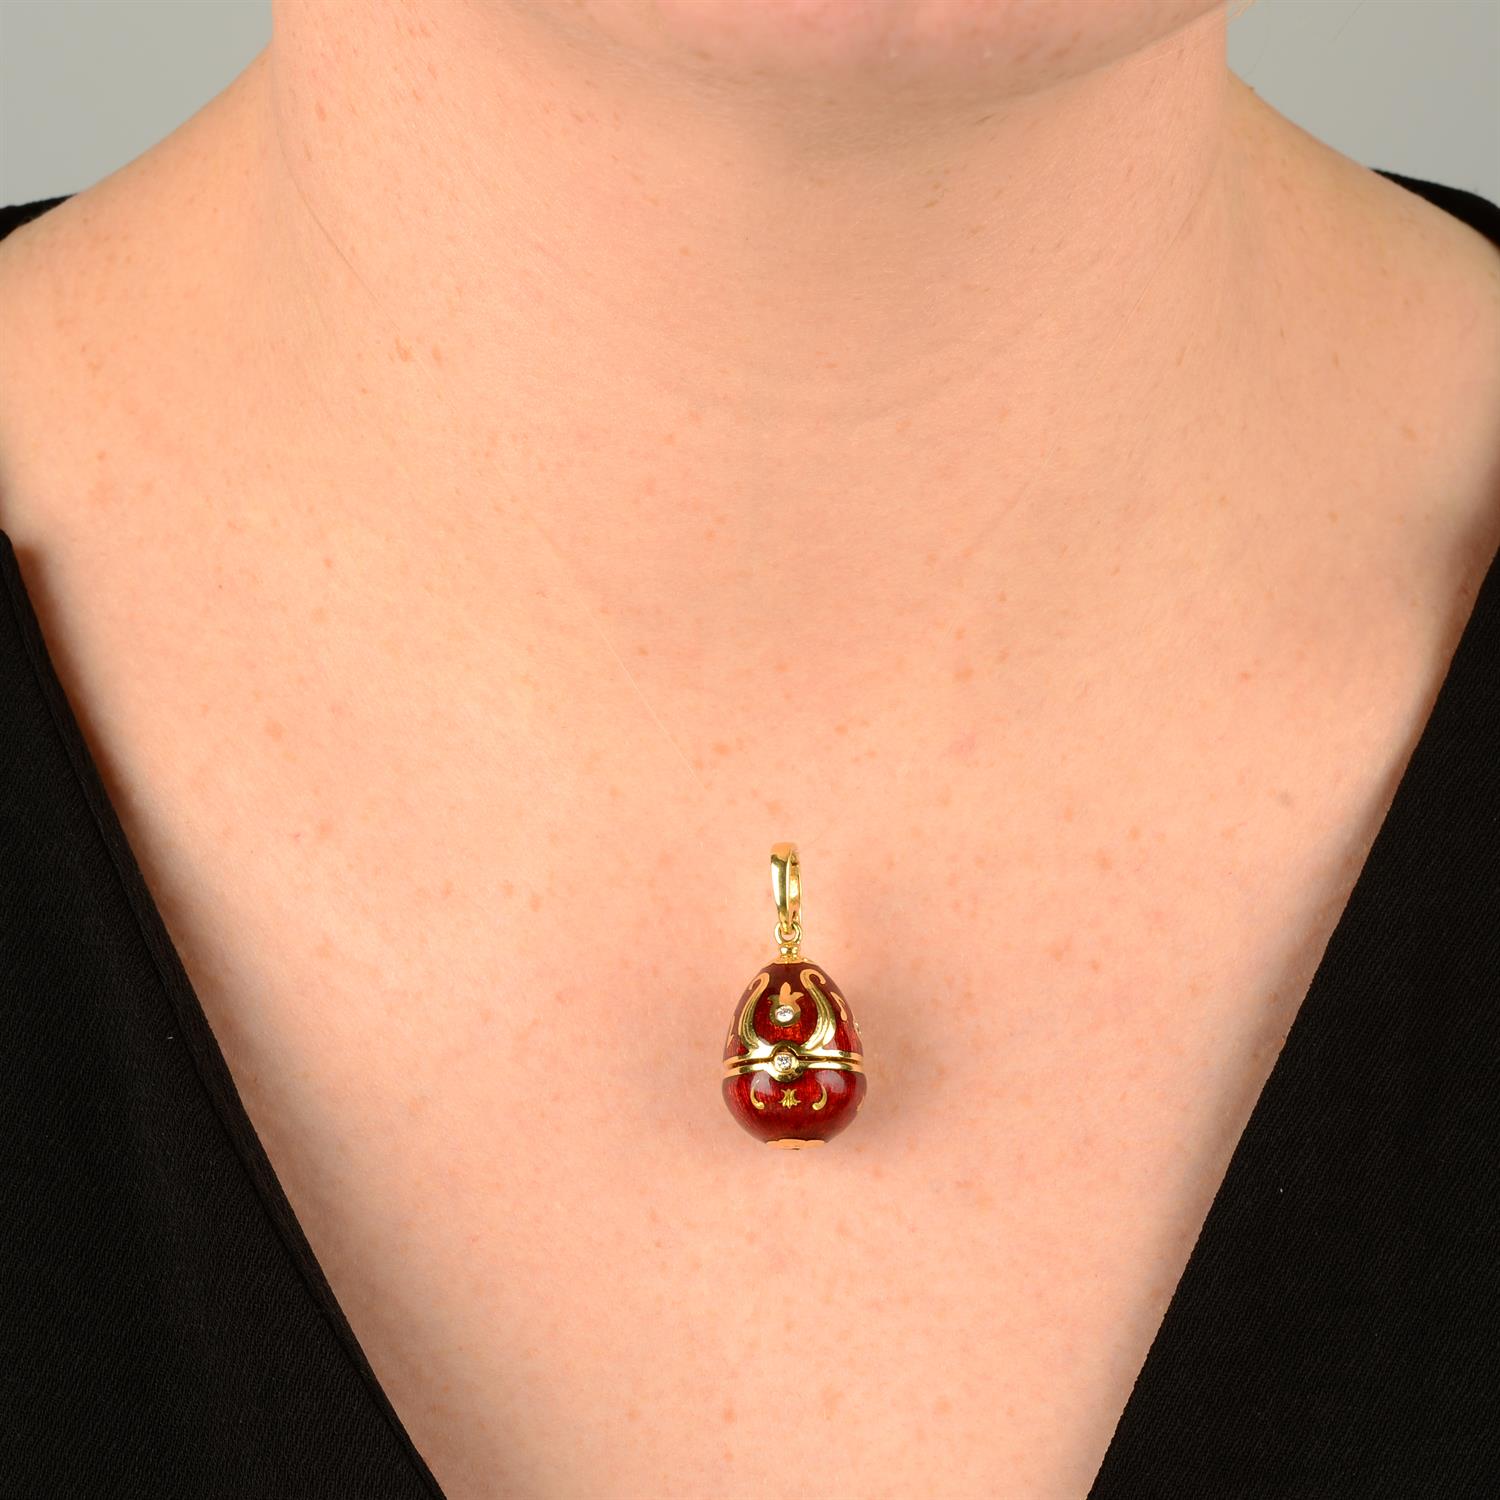 A limited edition 18ct gold diamond and red enamel hinged egg pendant, containing a treble clef, - Image 5 of 5